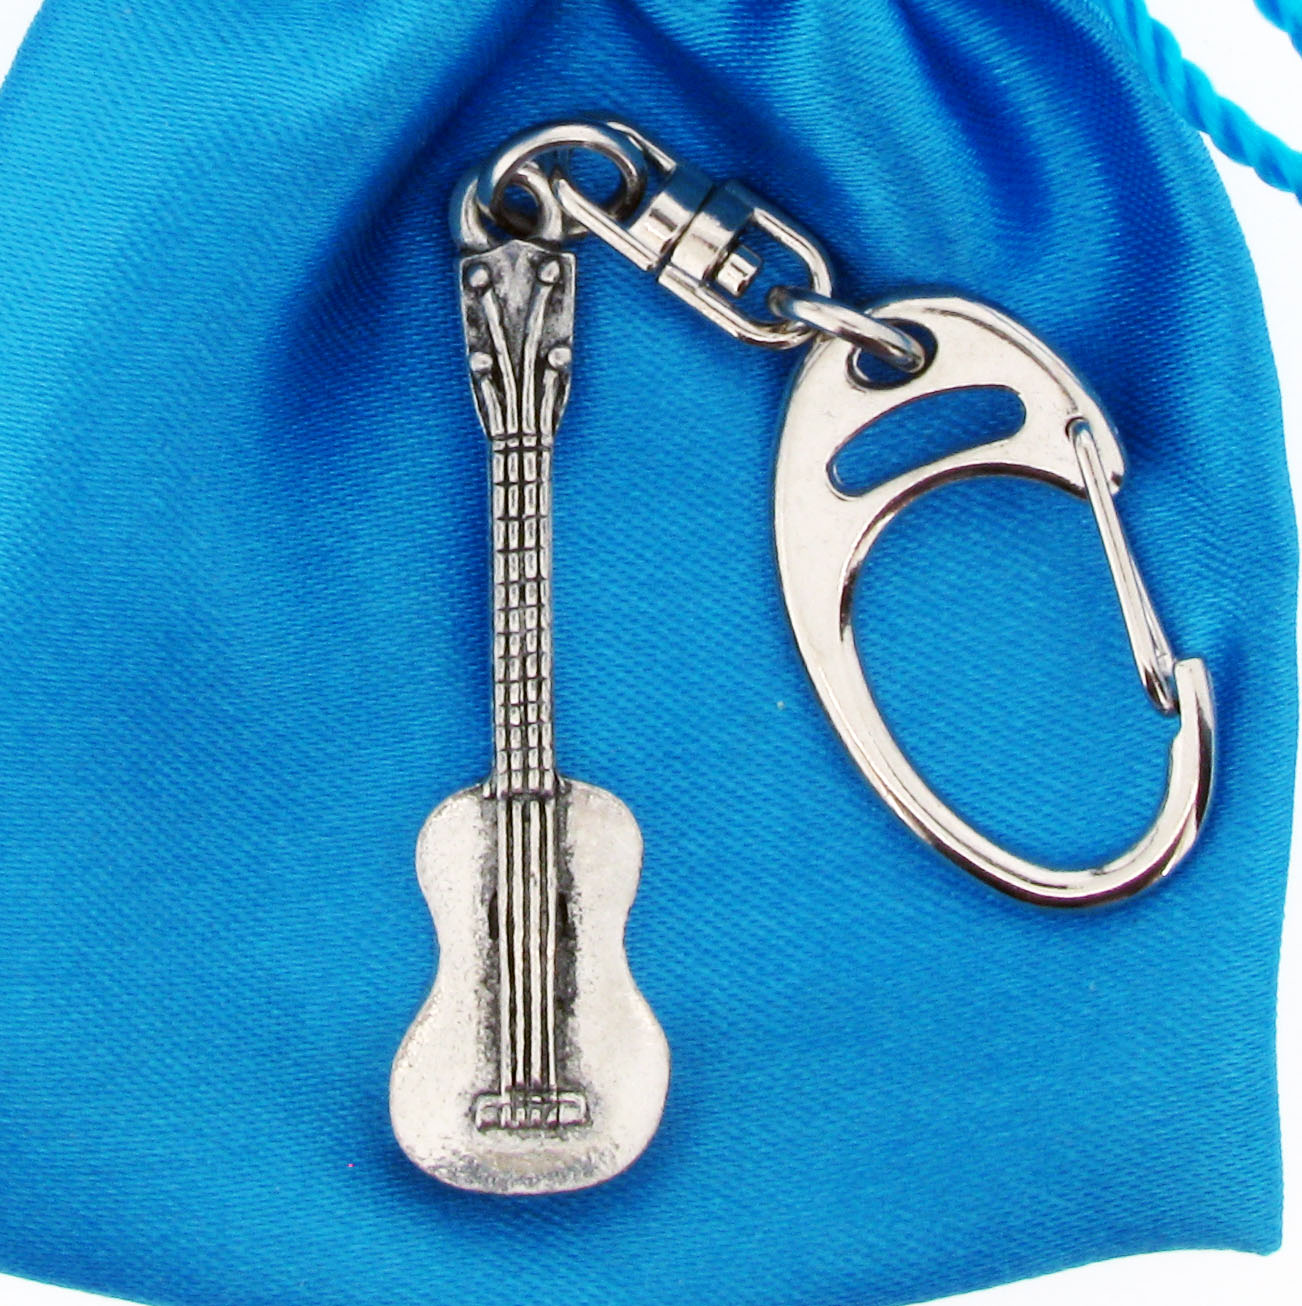 Ukelele Keyring - high quality pewter gifts from Pageant Pewter